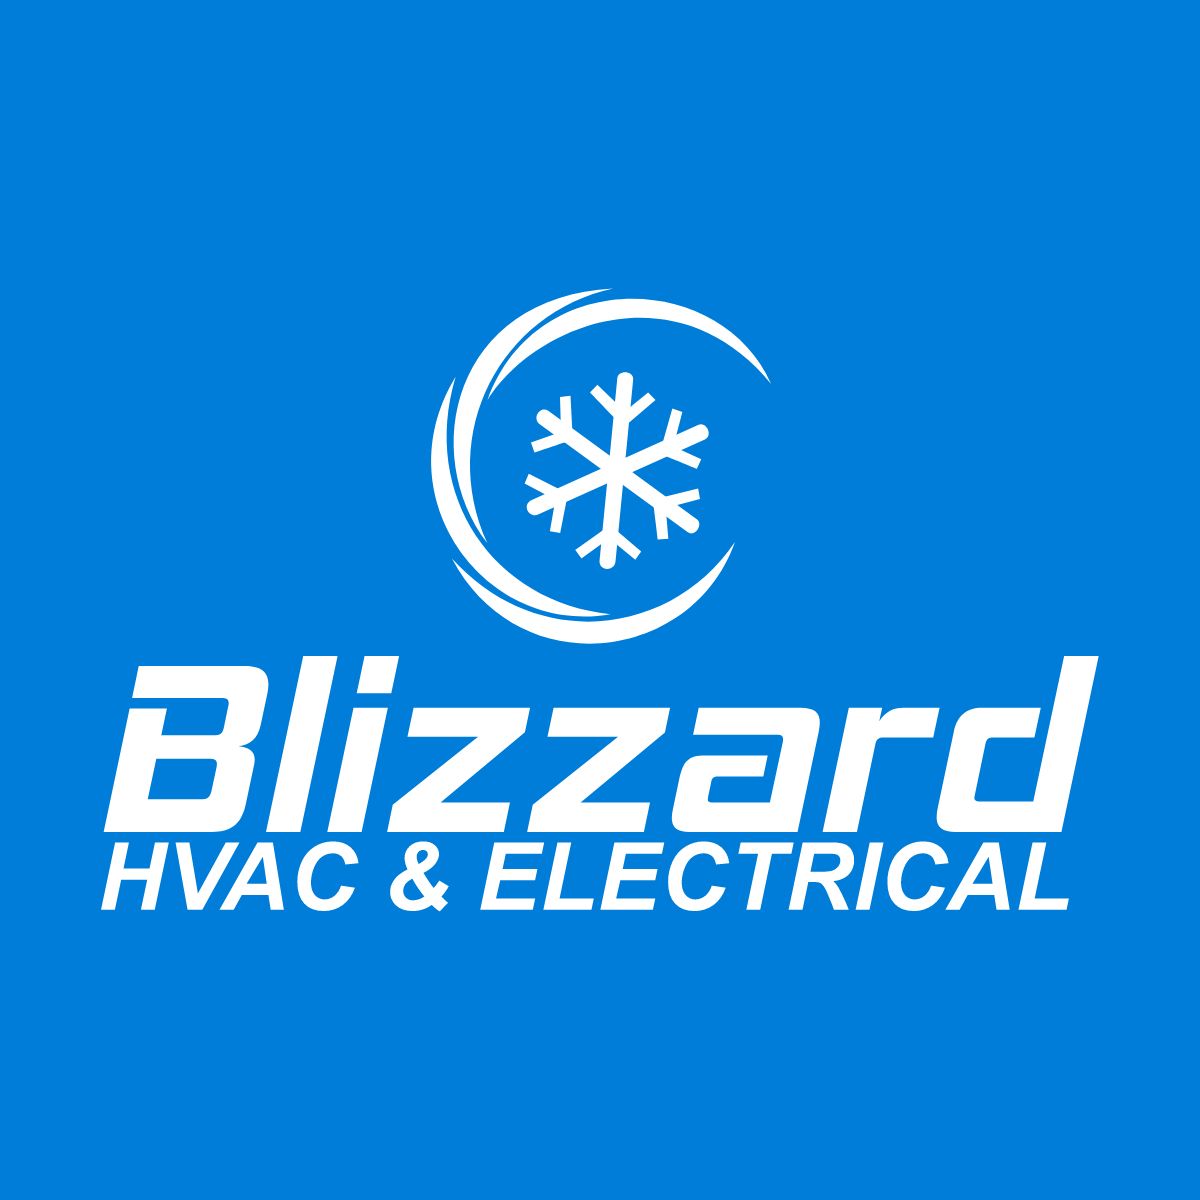 Wellingtons Top Choice for Ducted Heat Pump Installations | Blizzard